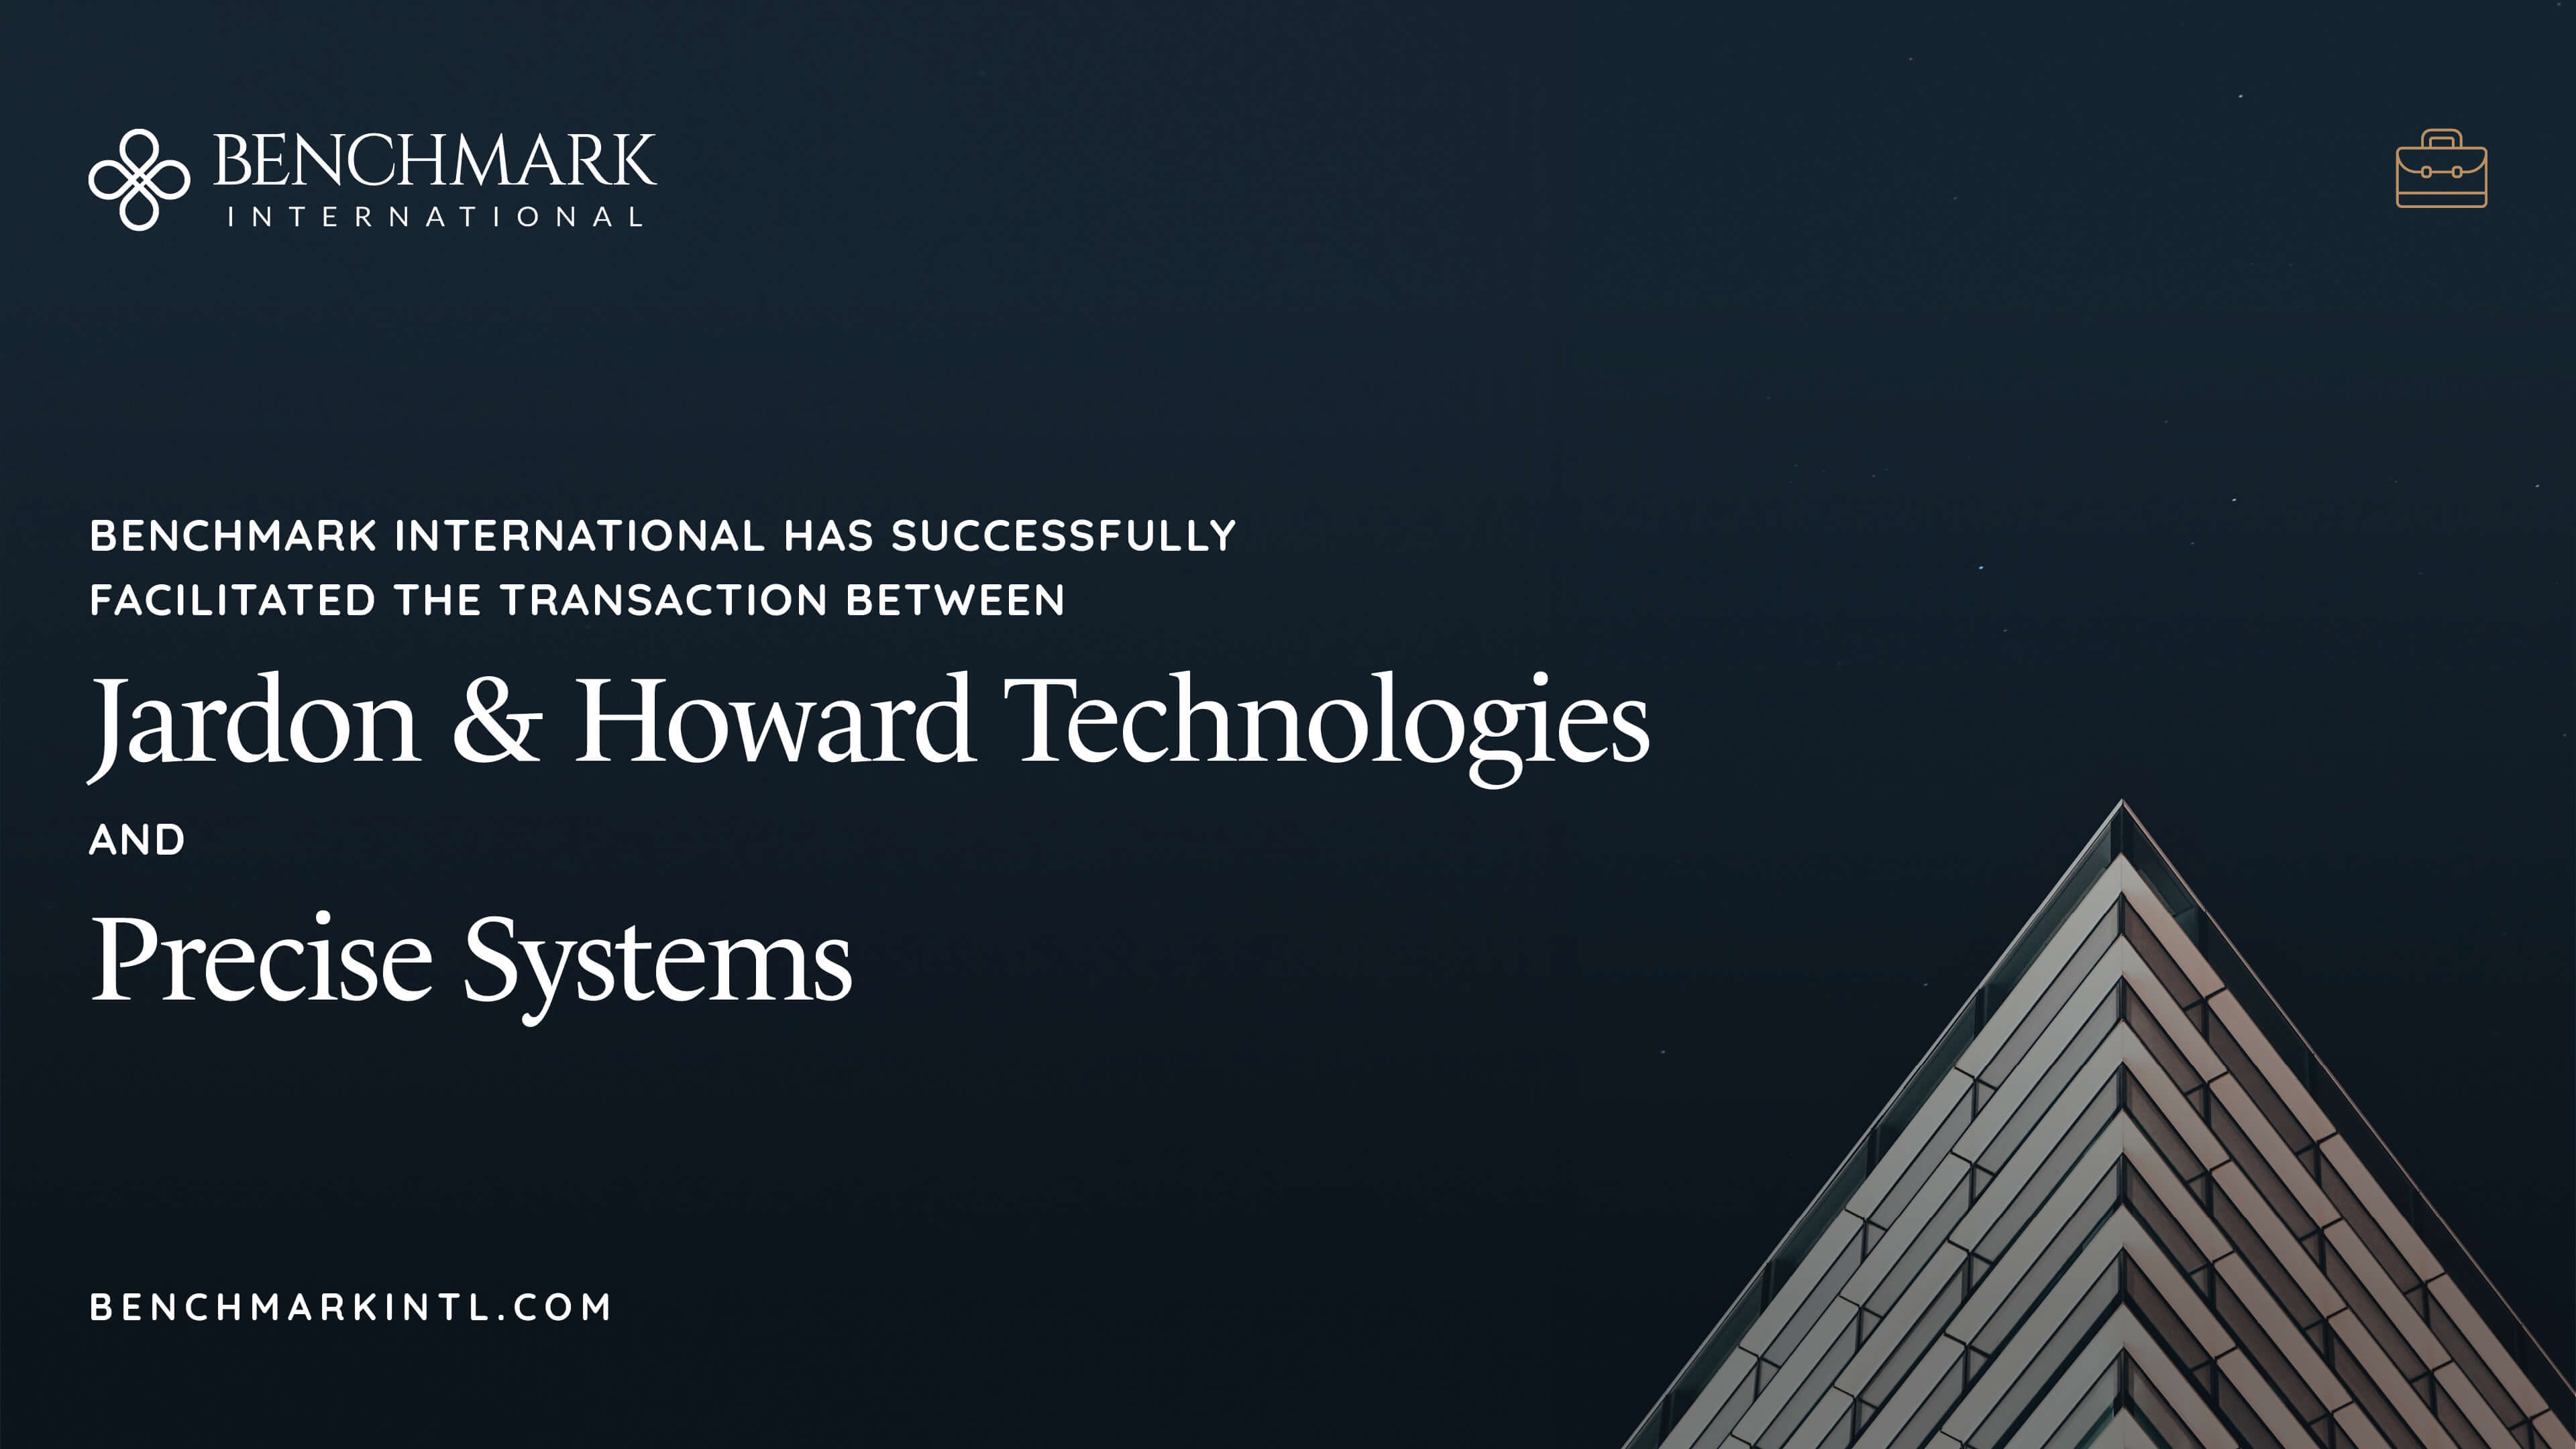 Benchmark International Successfully Facilitated The Transaction Between Jardon & Howard Technologies And Precise Systems